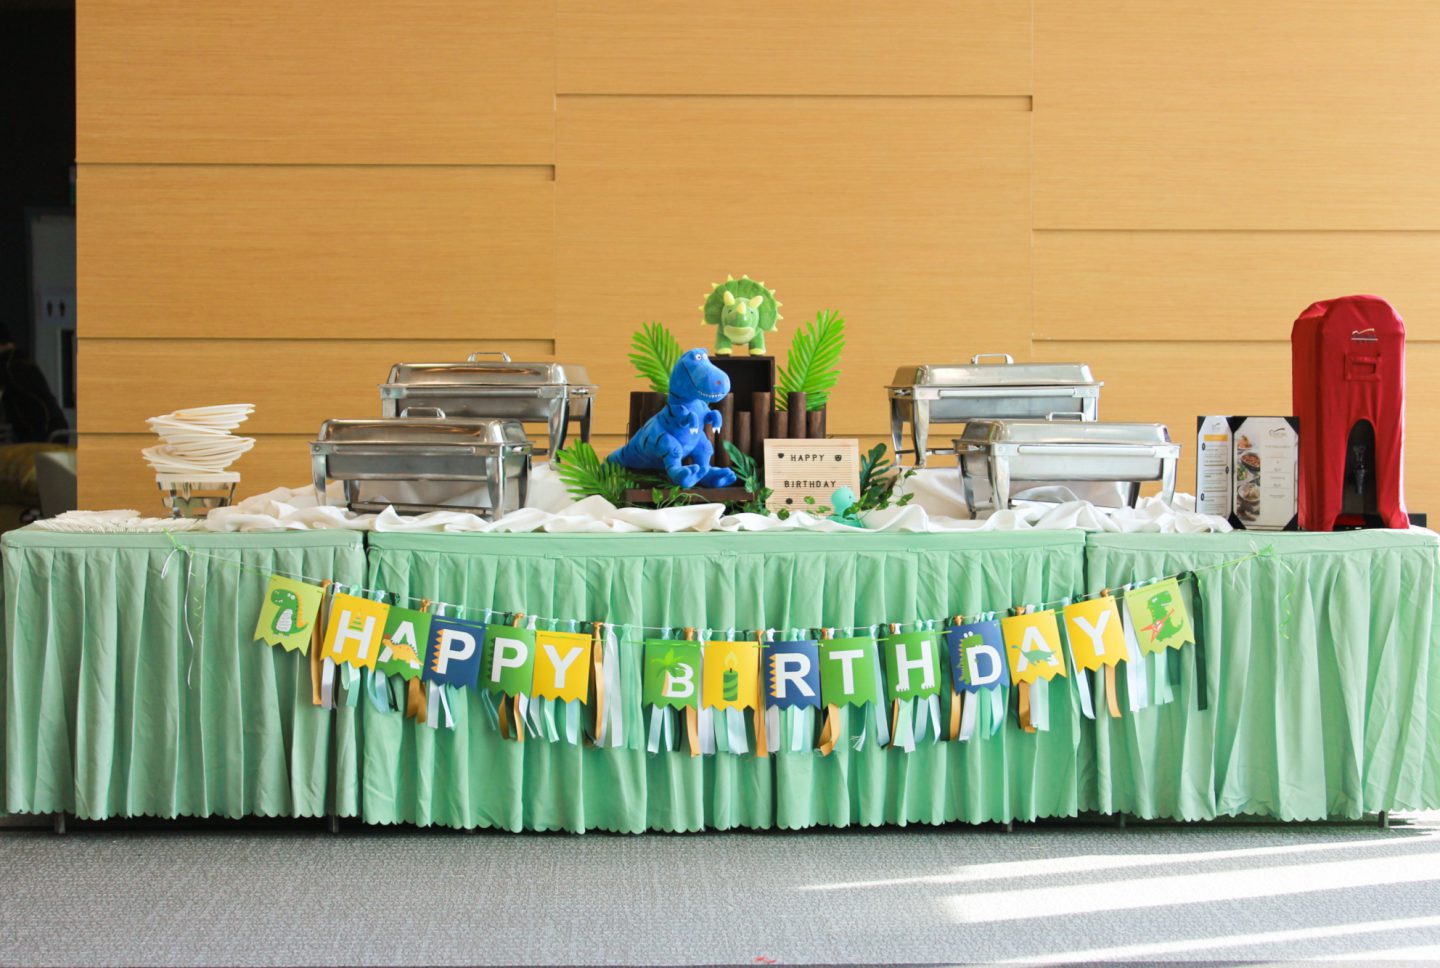 Kids' Party Catering Thematic Setup - Dinosaur